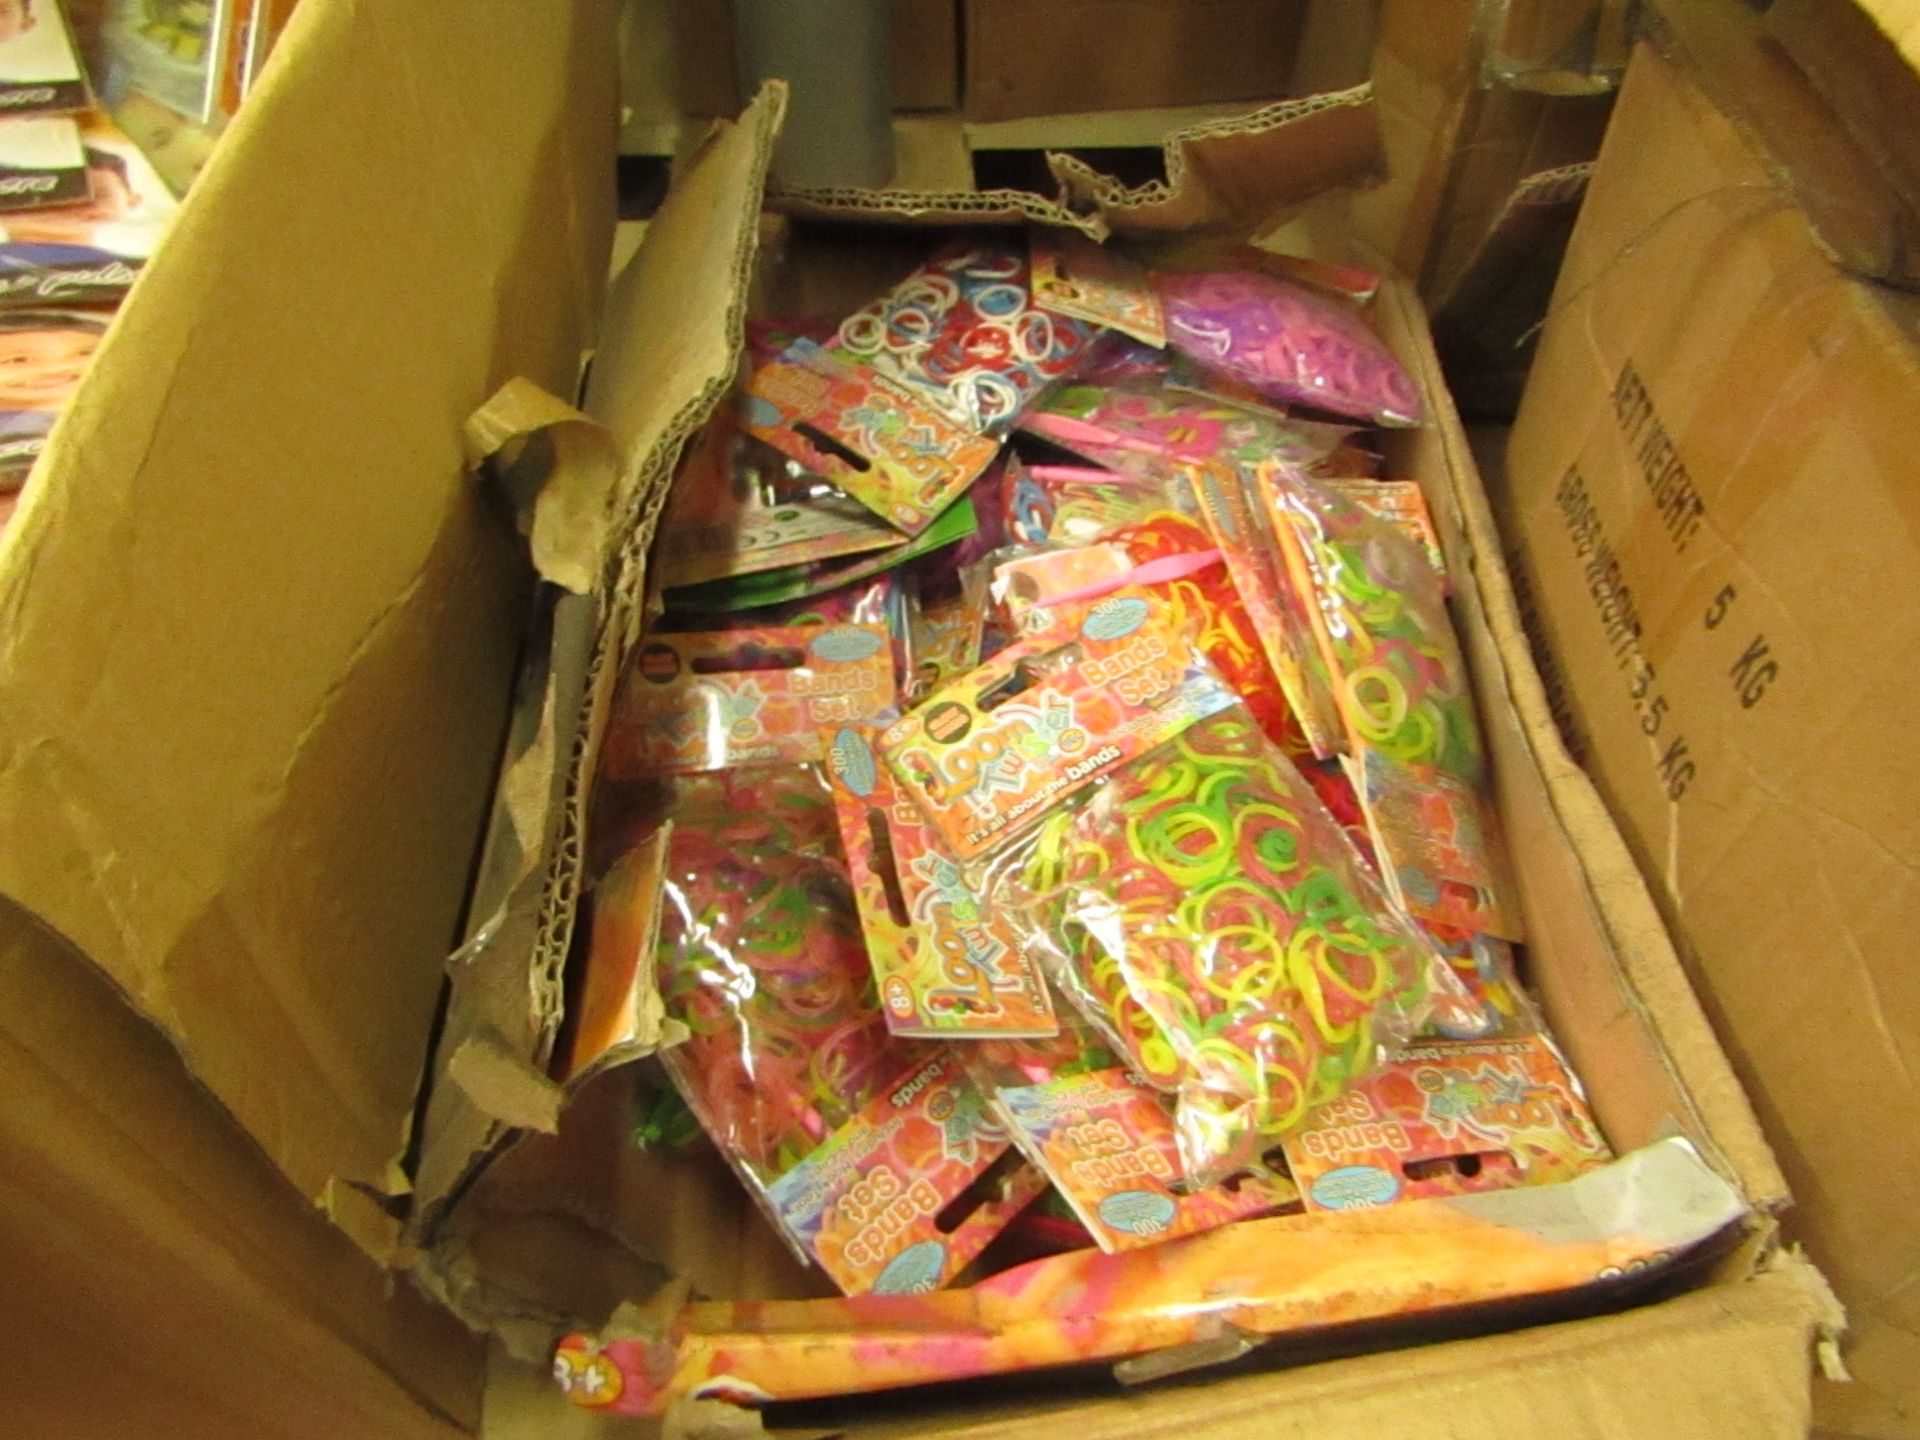 Approx 25 Packs of 300 Loom Bands.Packaged